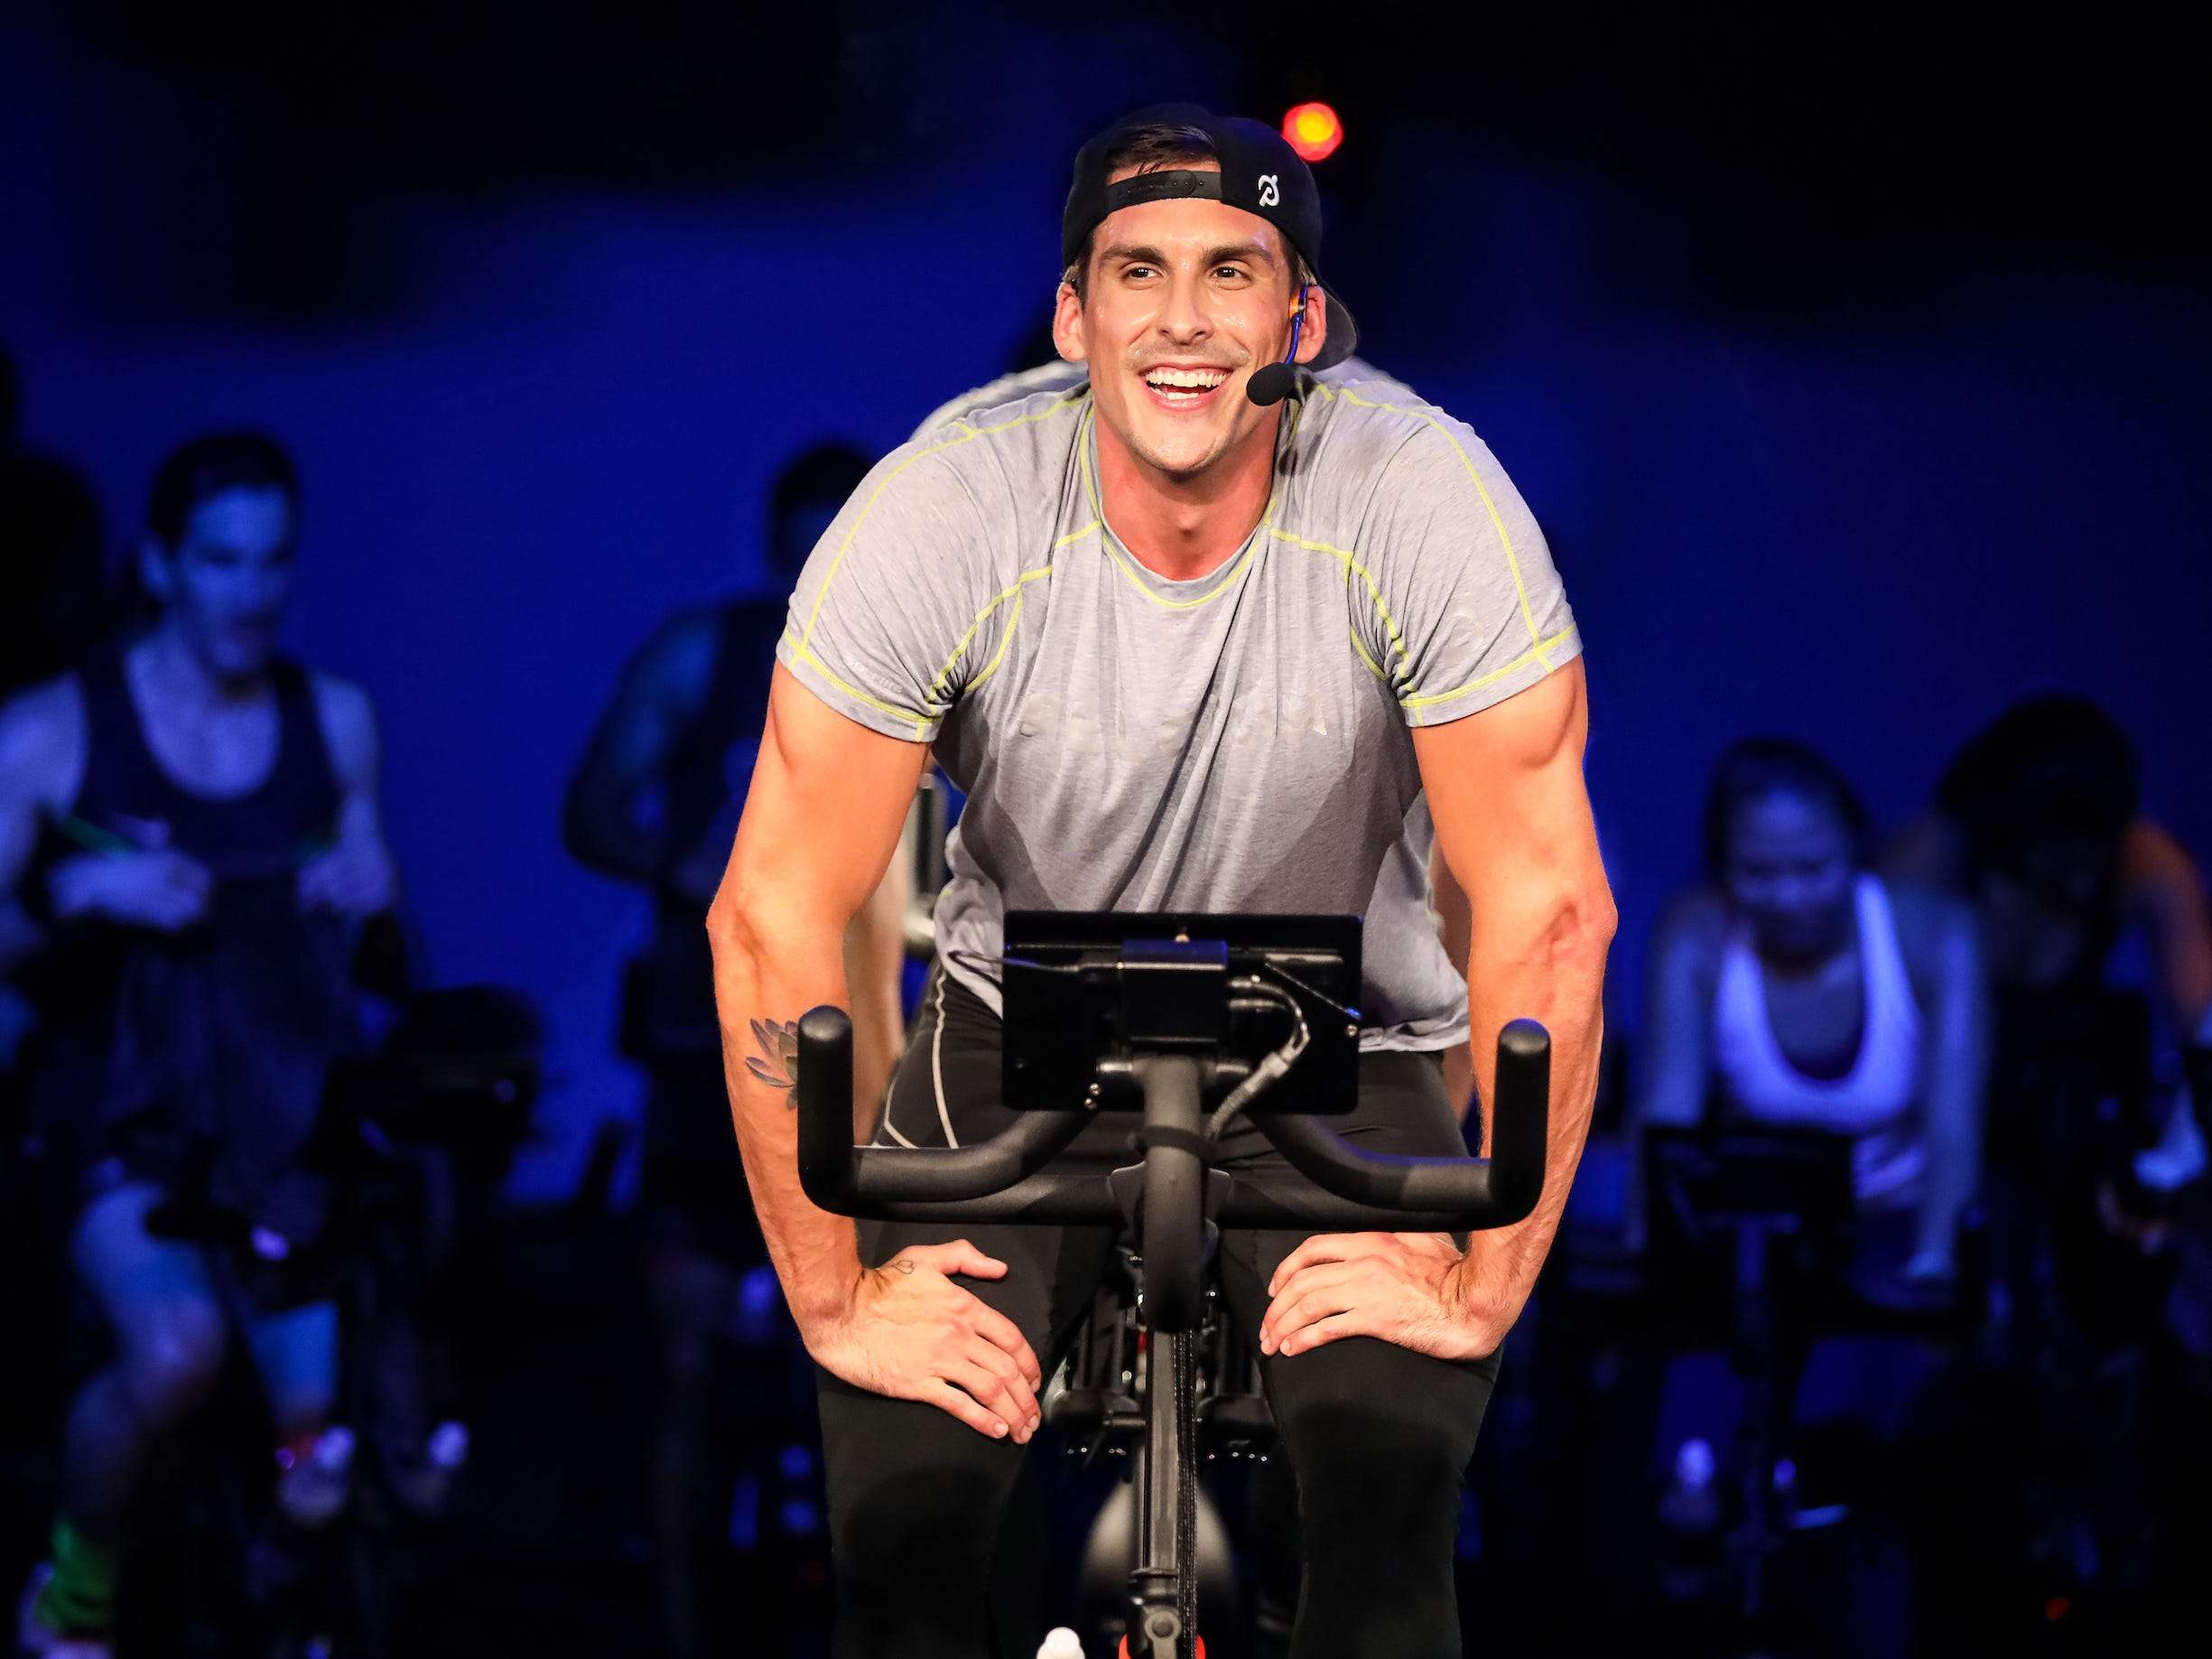 Top Peloton Instructor Cody Rigsby Said He Has Covid-19, And It'S The Sickest He'S Ever Felt | Business Insider India